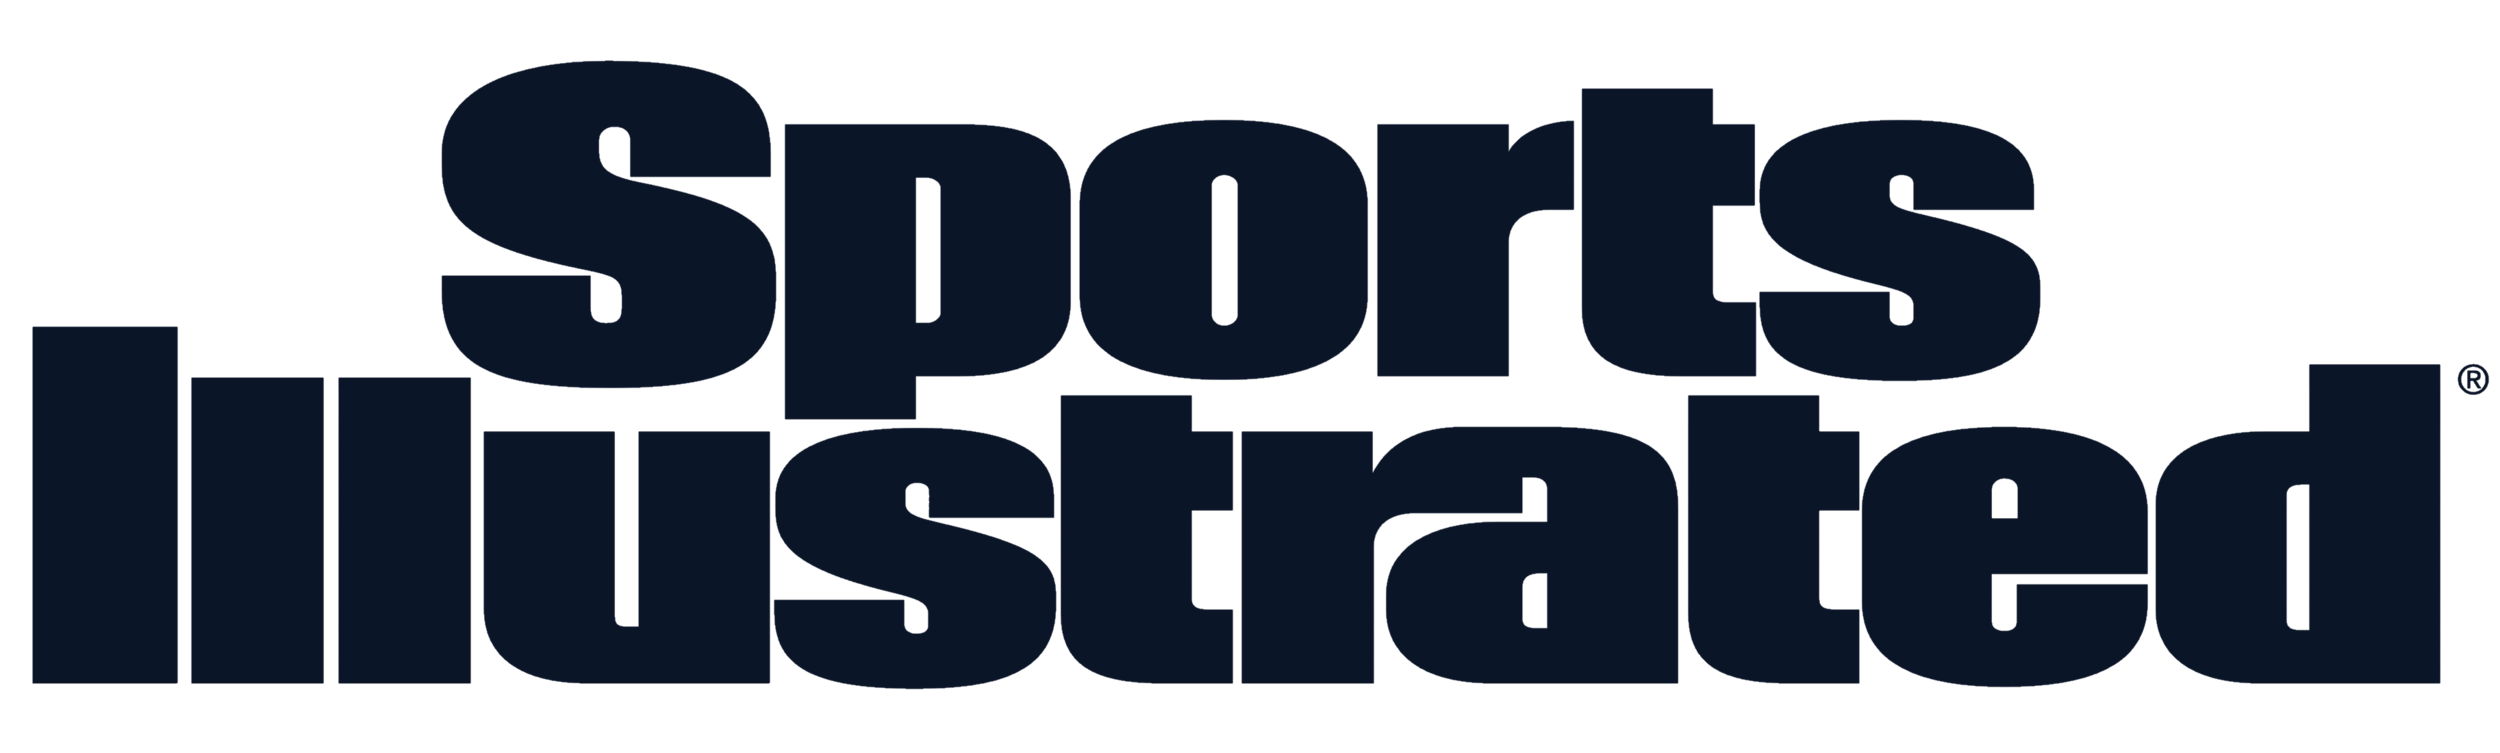 Sports_Illustrated_logo_blue.png